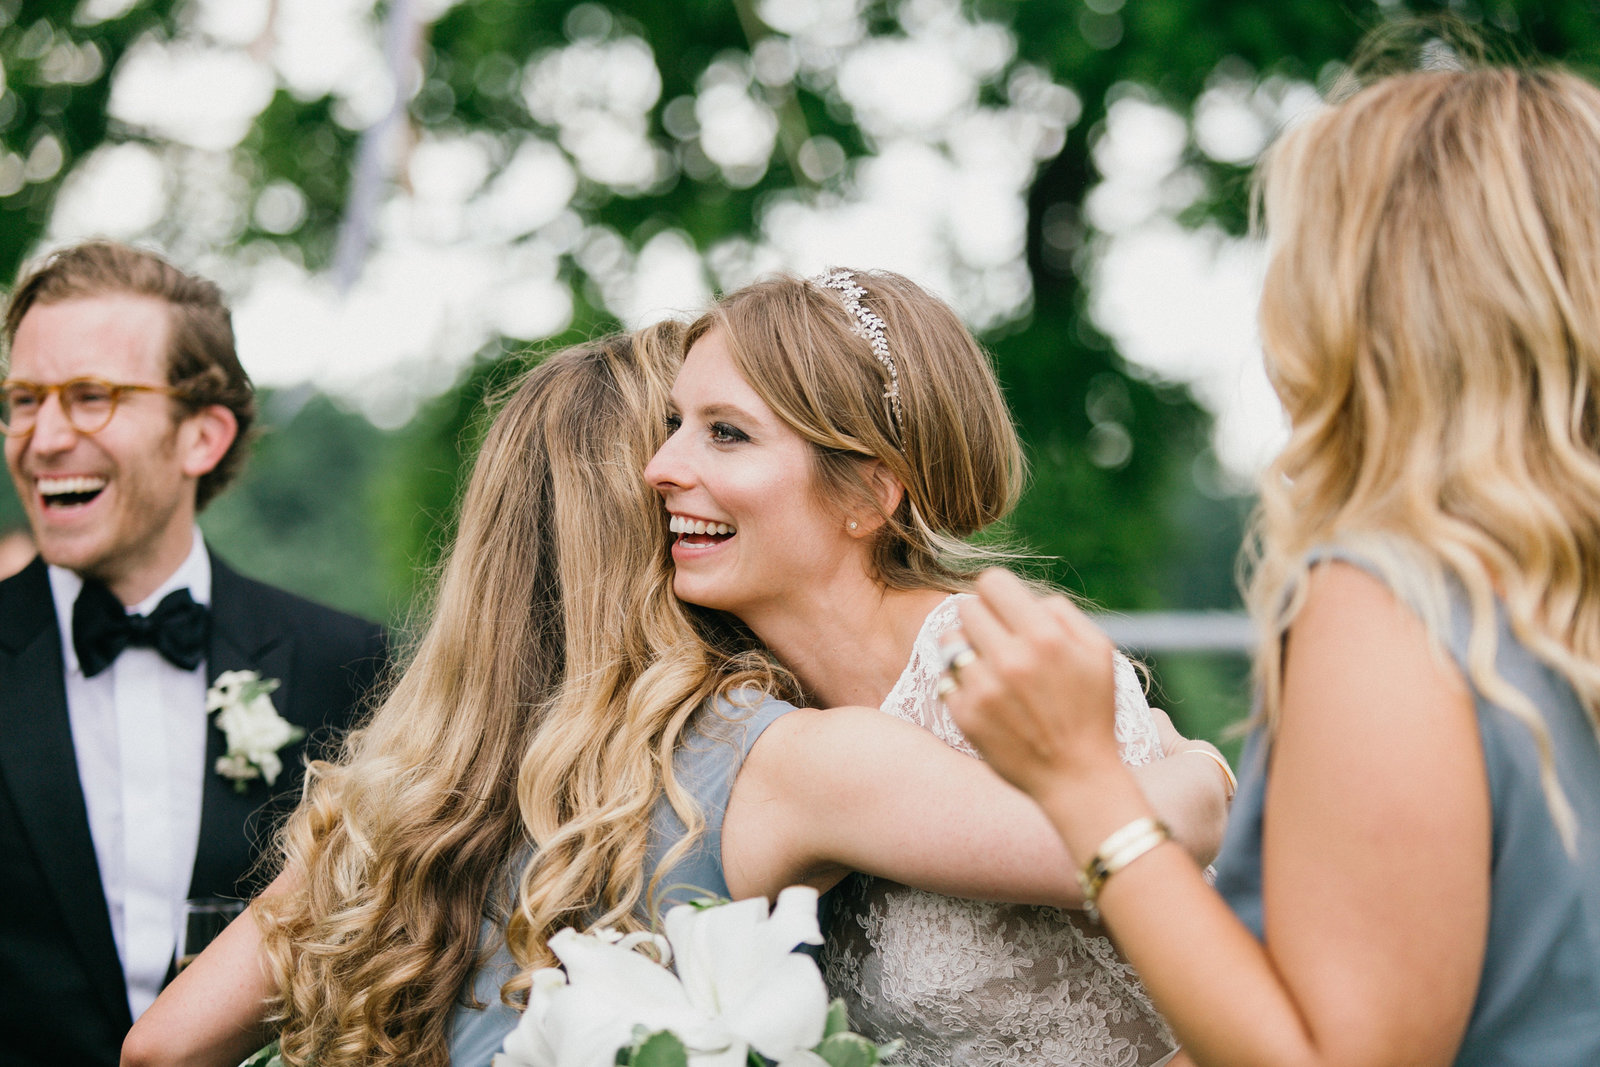 Bride shares an embrace with her sister after the ceremony.